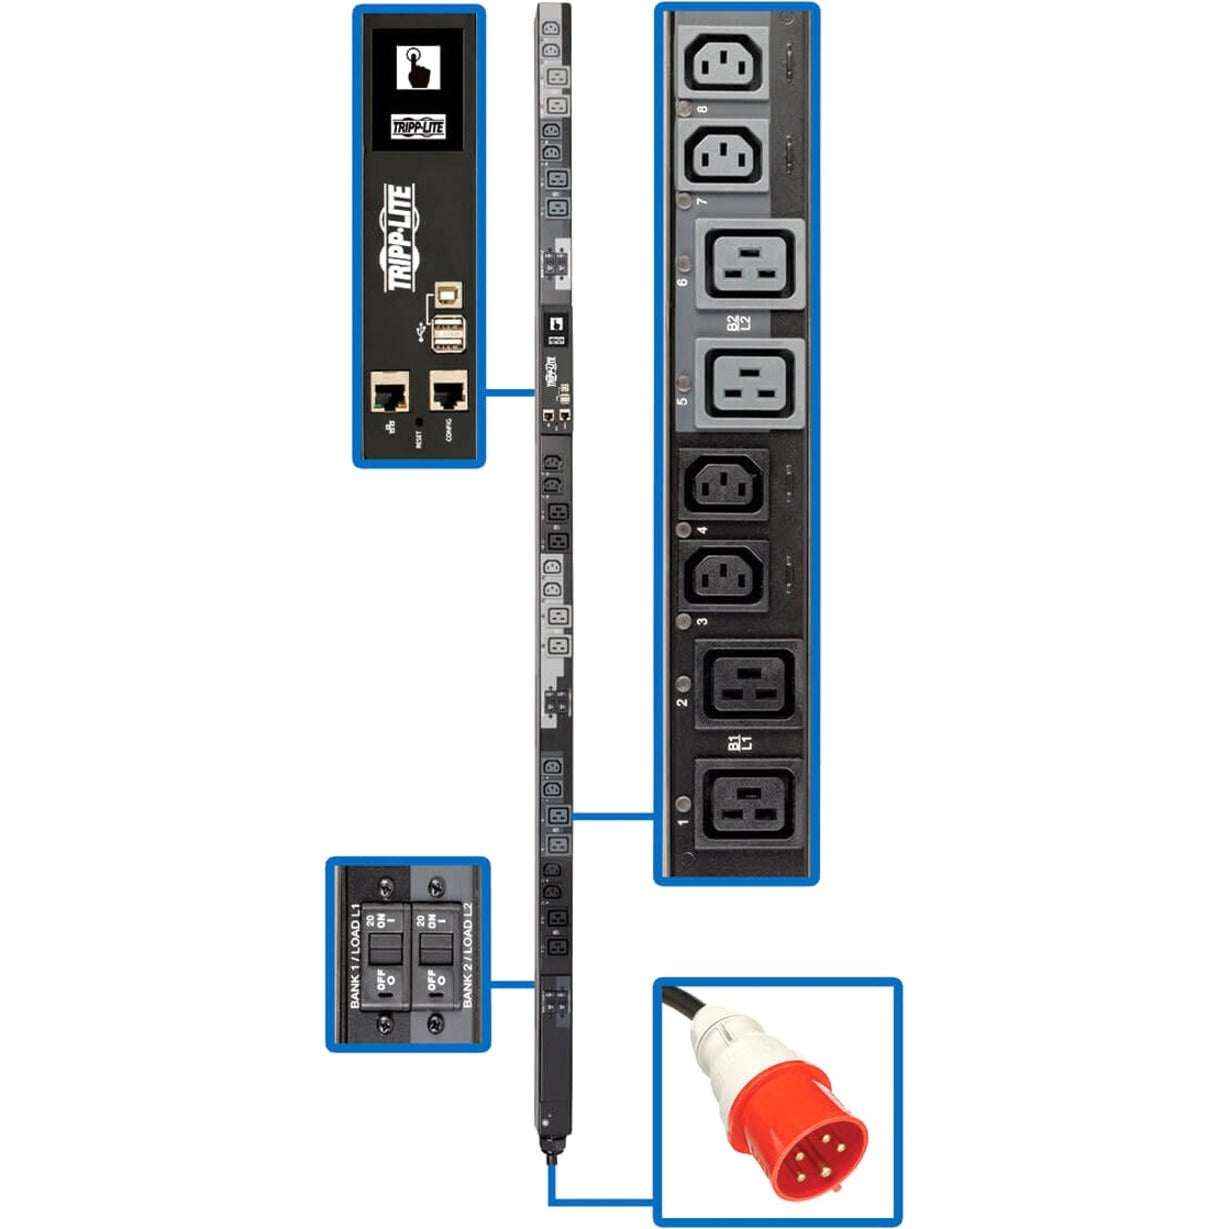 Tripp Lite PDU3XEVSR6G30A 24-Outlets PDU, 17.3KW 3-Phase Switched Power Distribution Unit